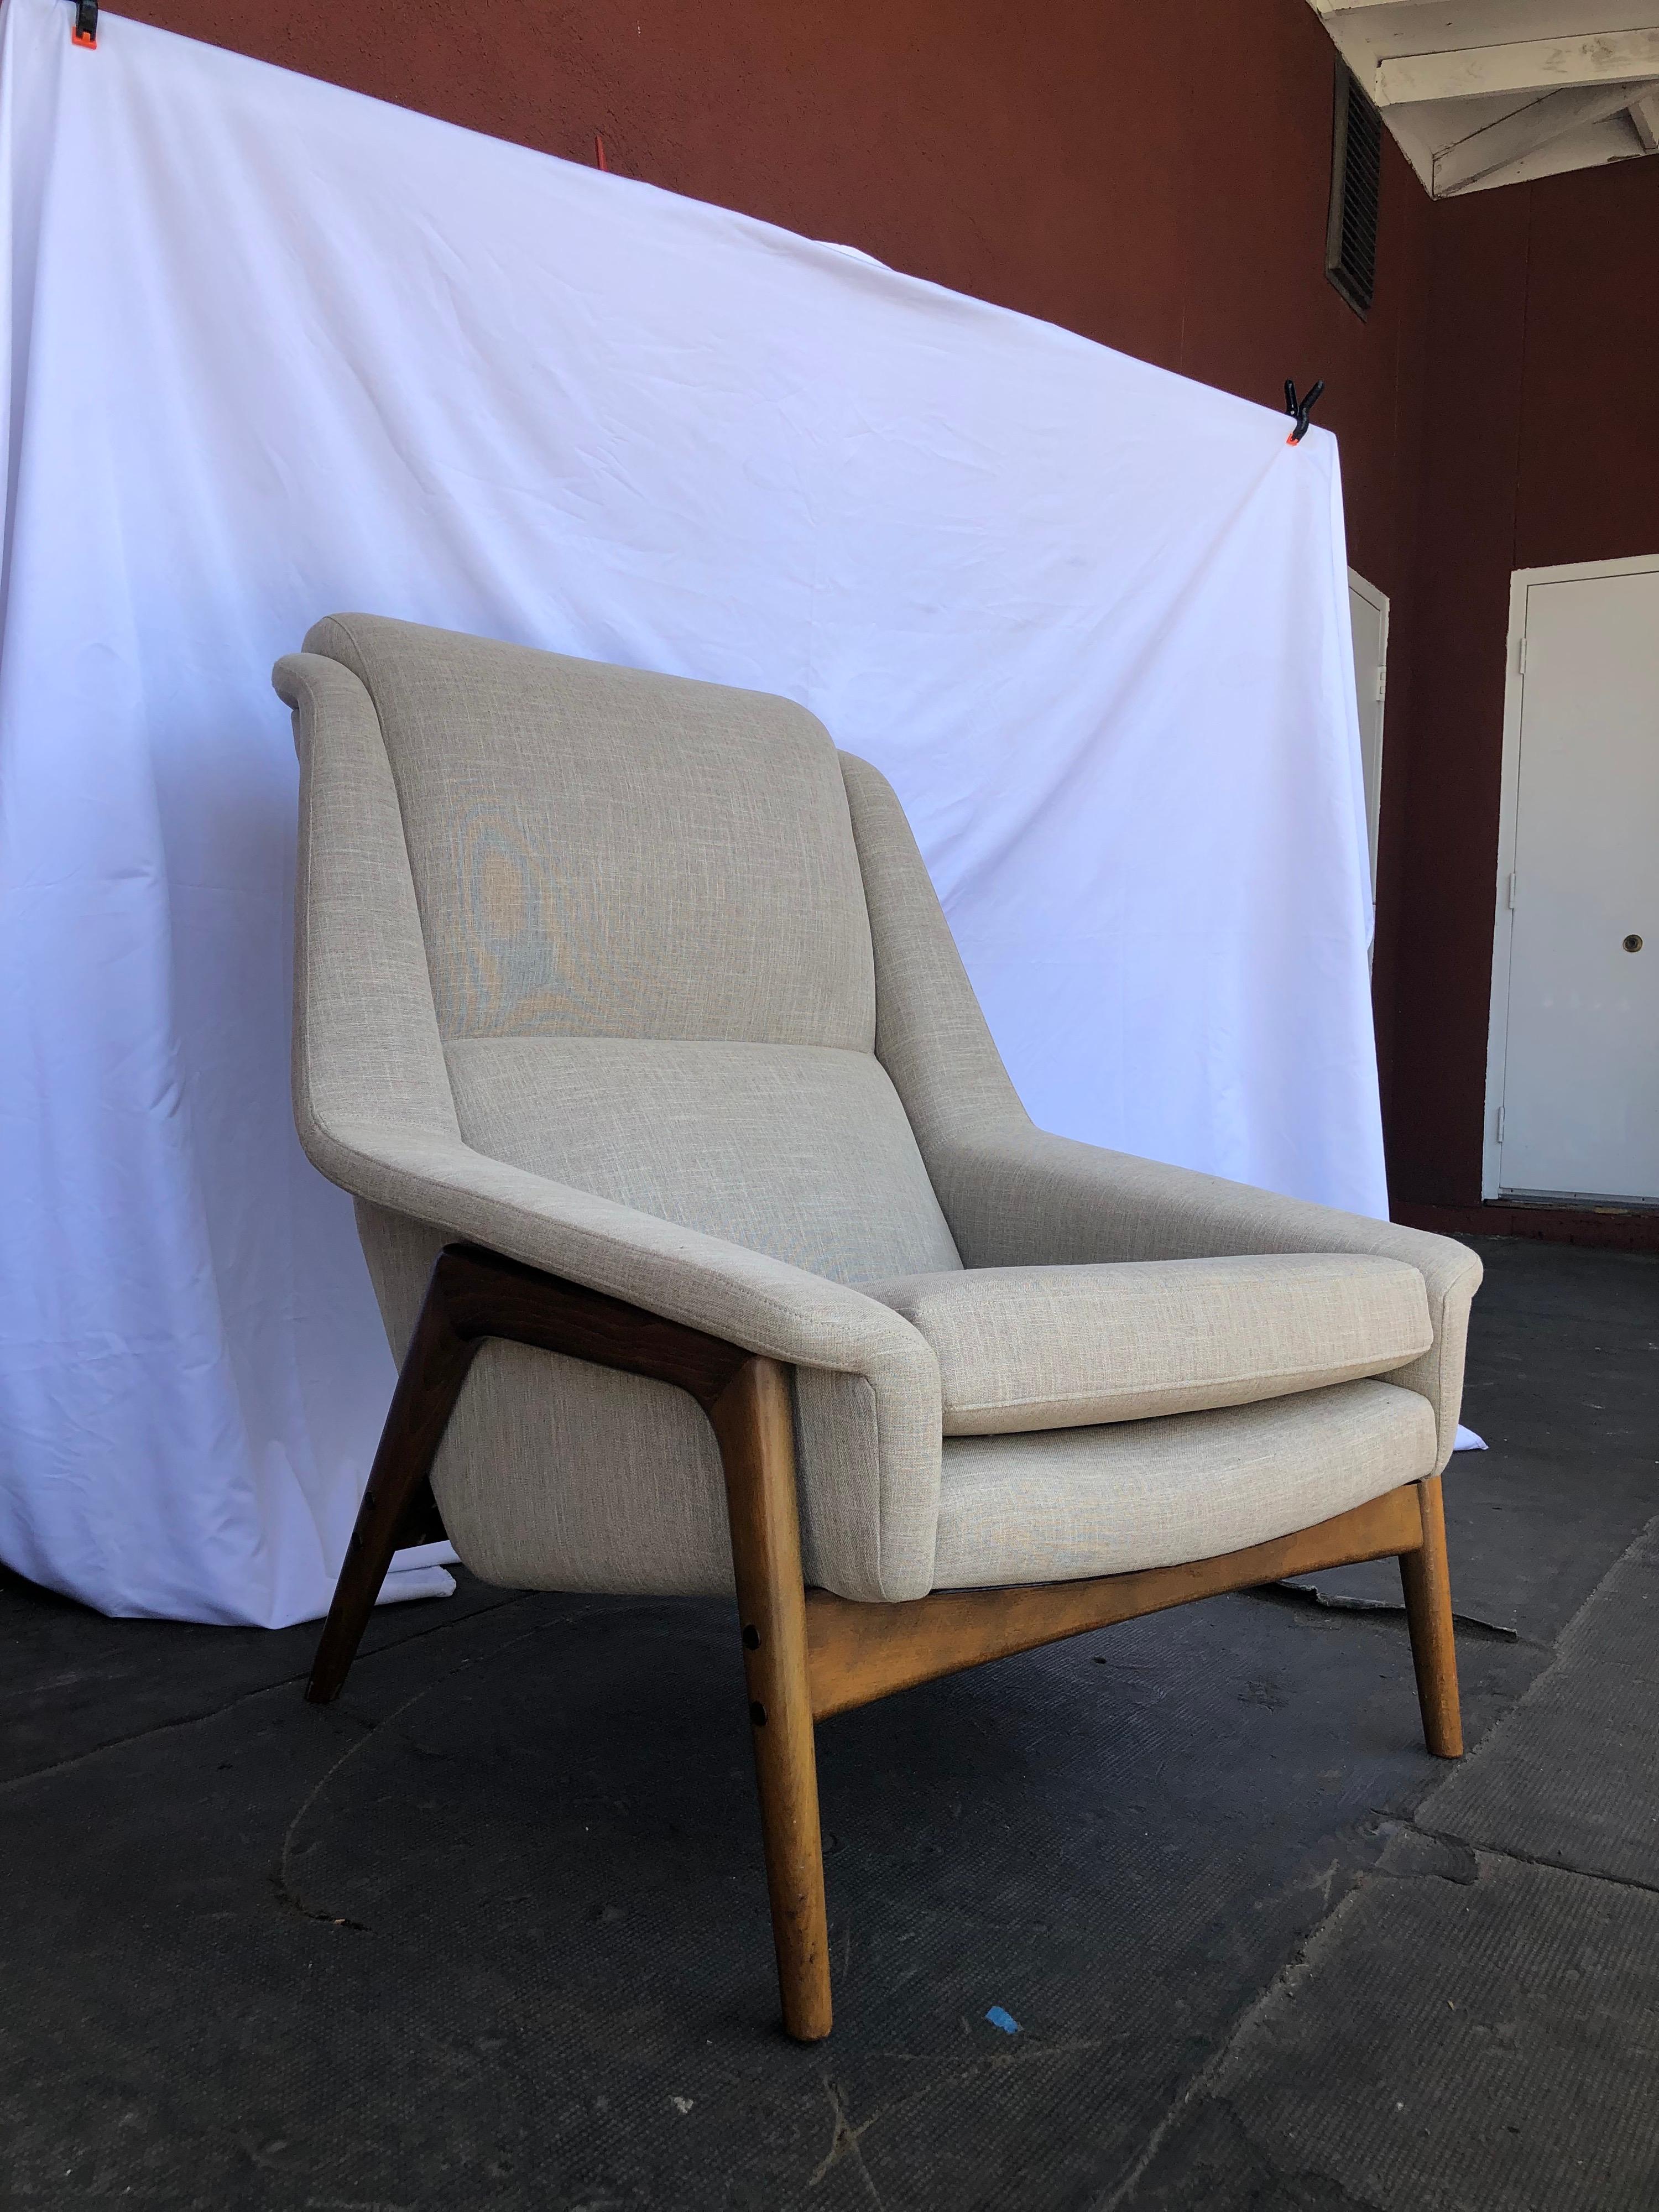 Mid-20th Century Vintage Mid-Century Modern Sofa Lounge Chair by Folke Ohlsson for DUX For Sale